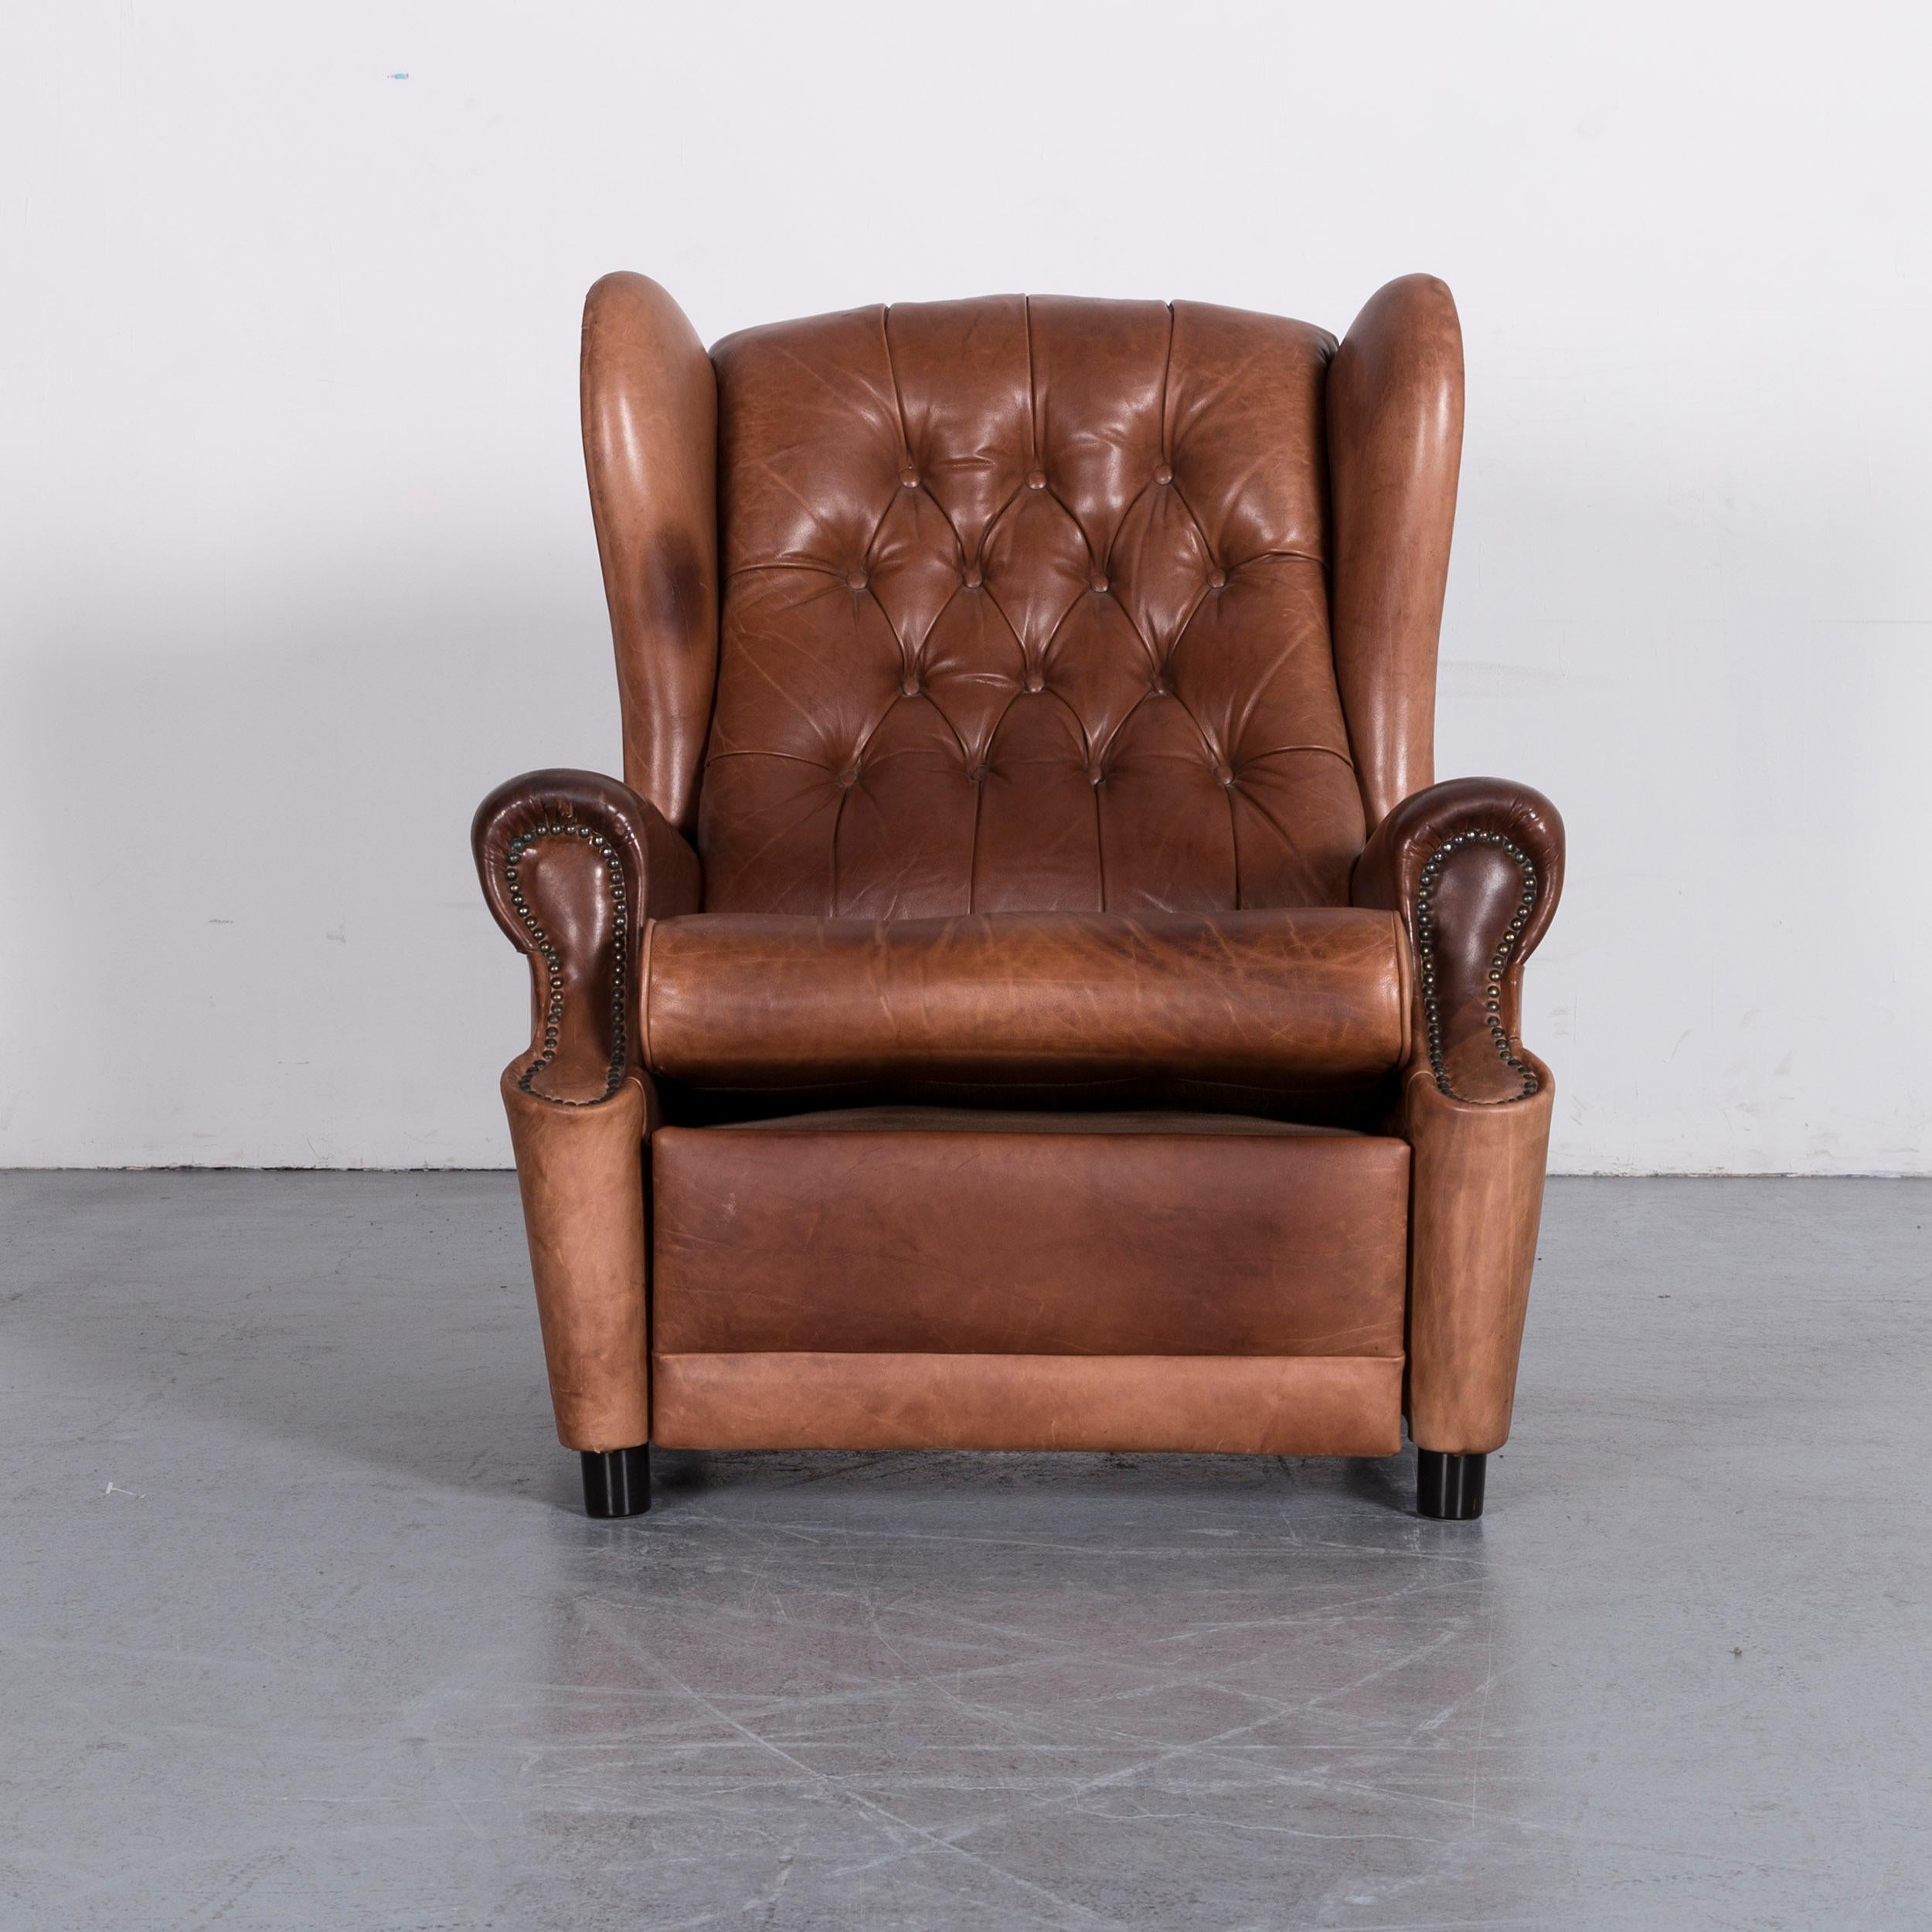 Contemporary Chesterfield Leather Armchair Brown One-Seat Vintage Retro with Relax Function